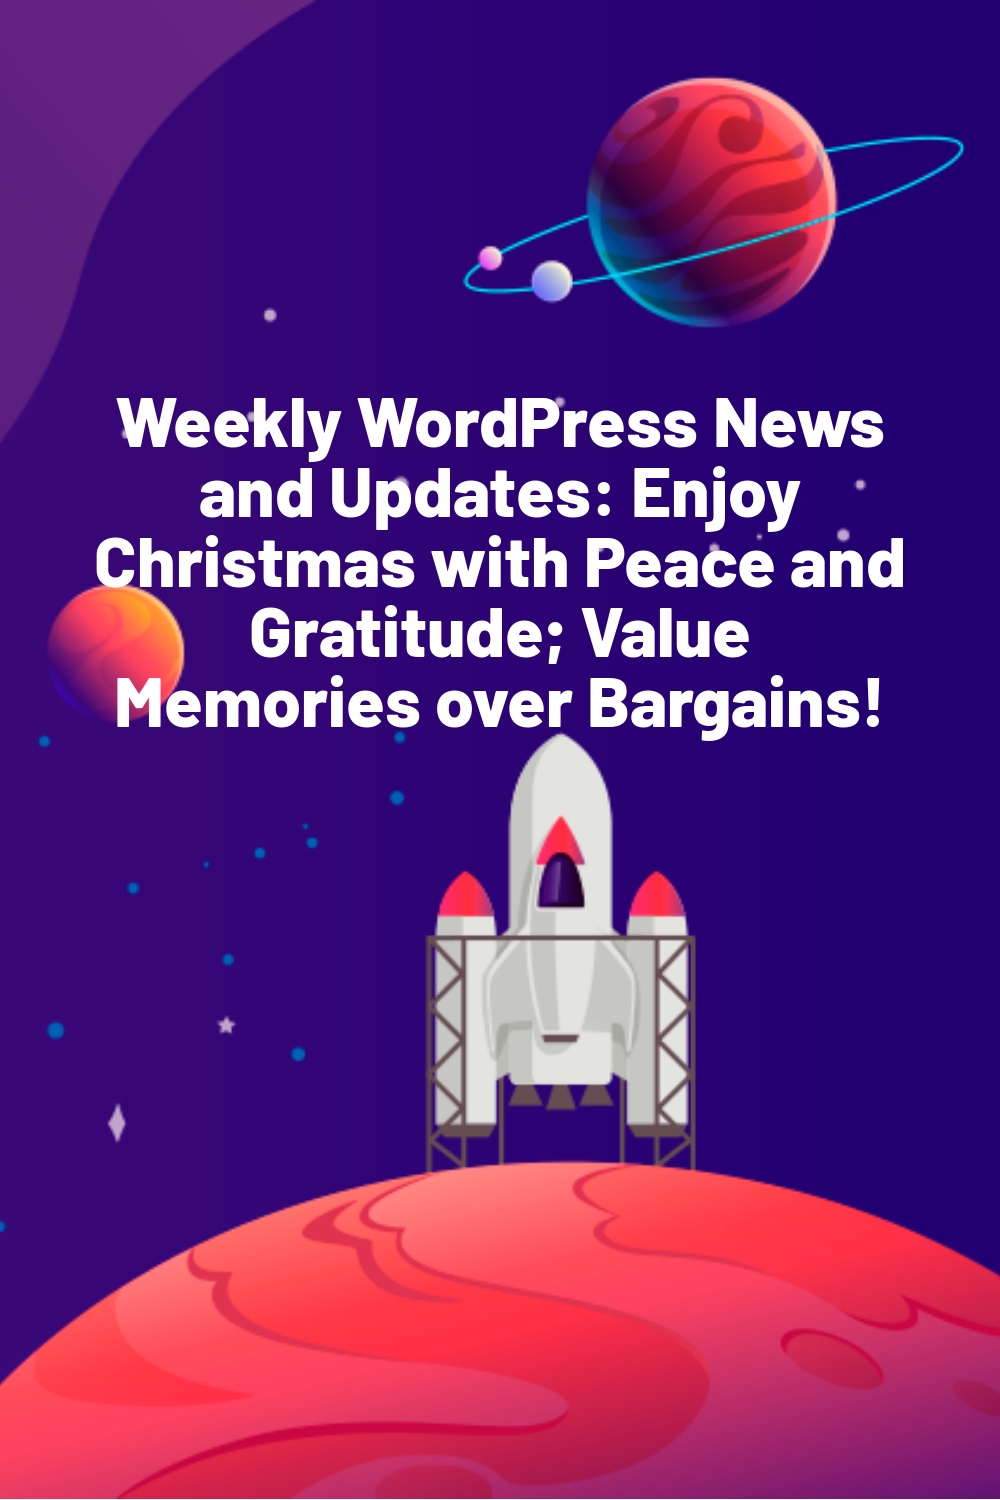 Weekly WordPress News and Updates: Enjoy Christmas with Peace and Gratitude; Value Memories over Bargains!